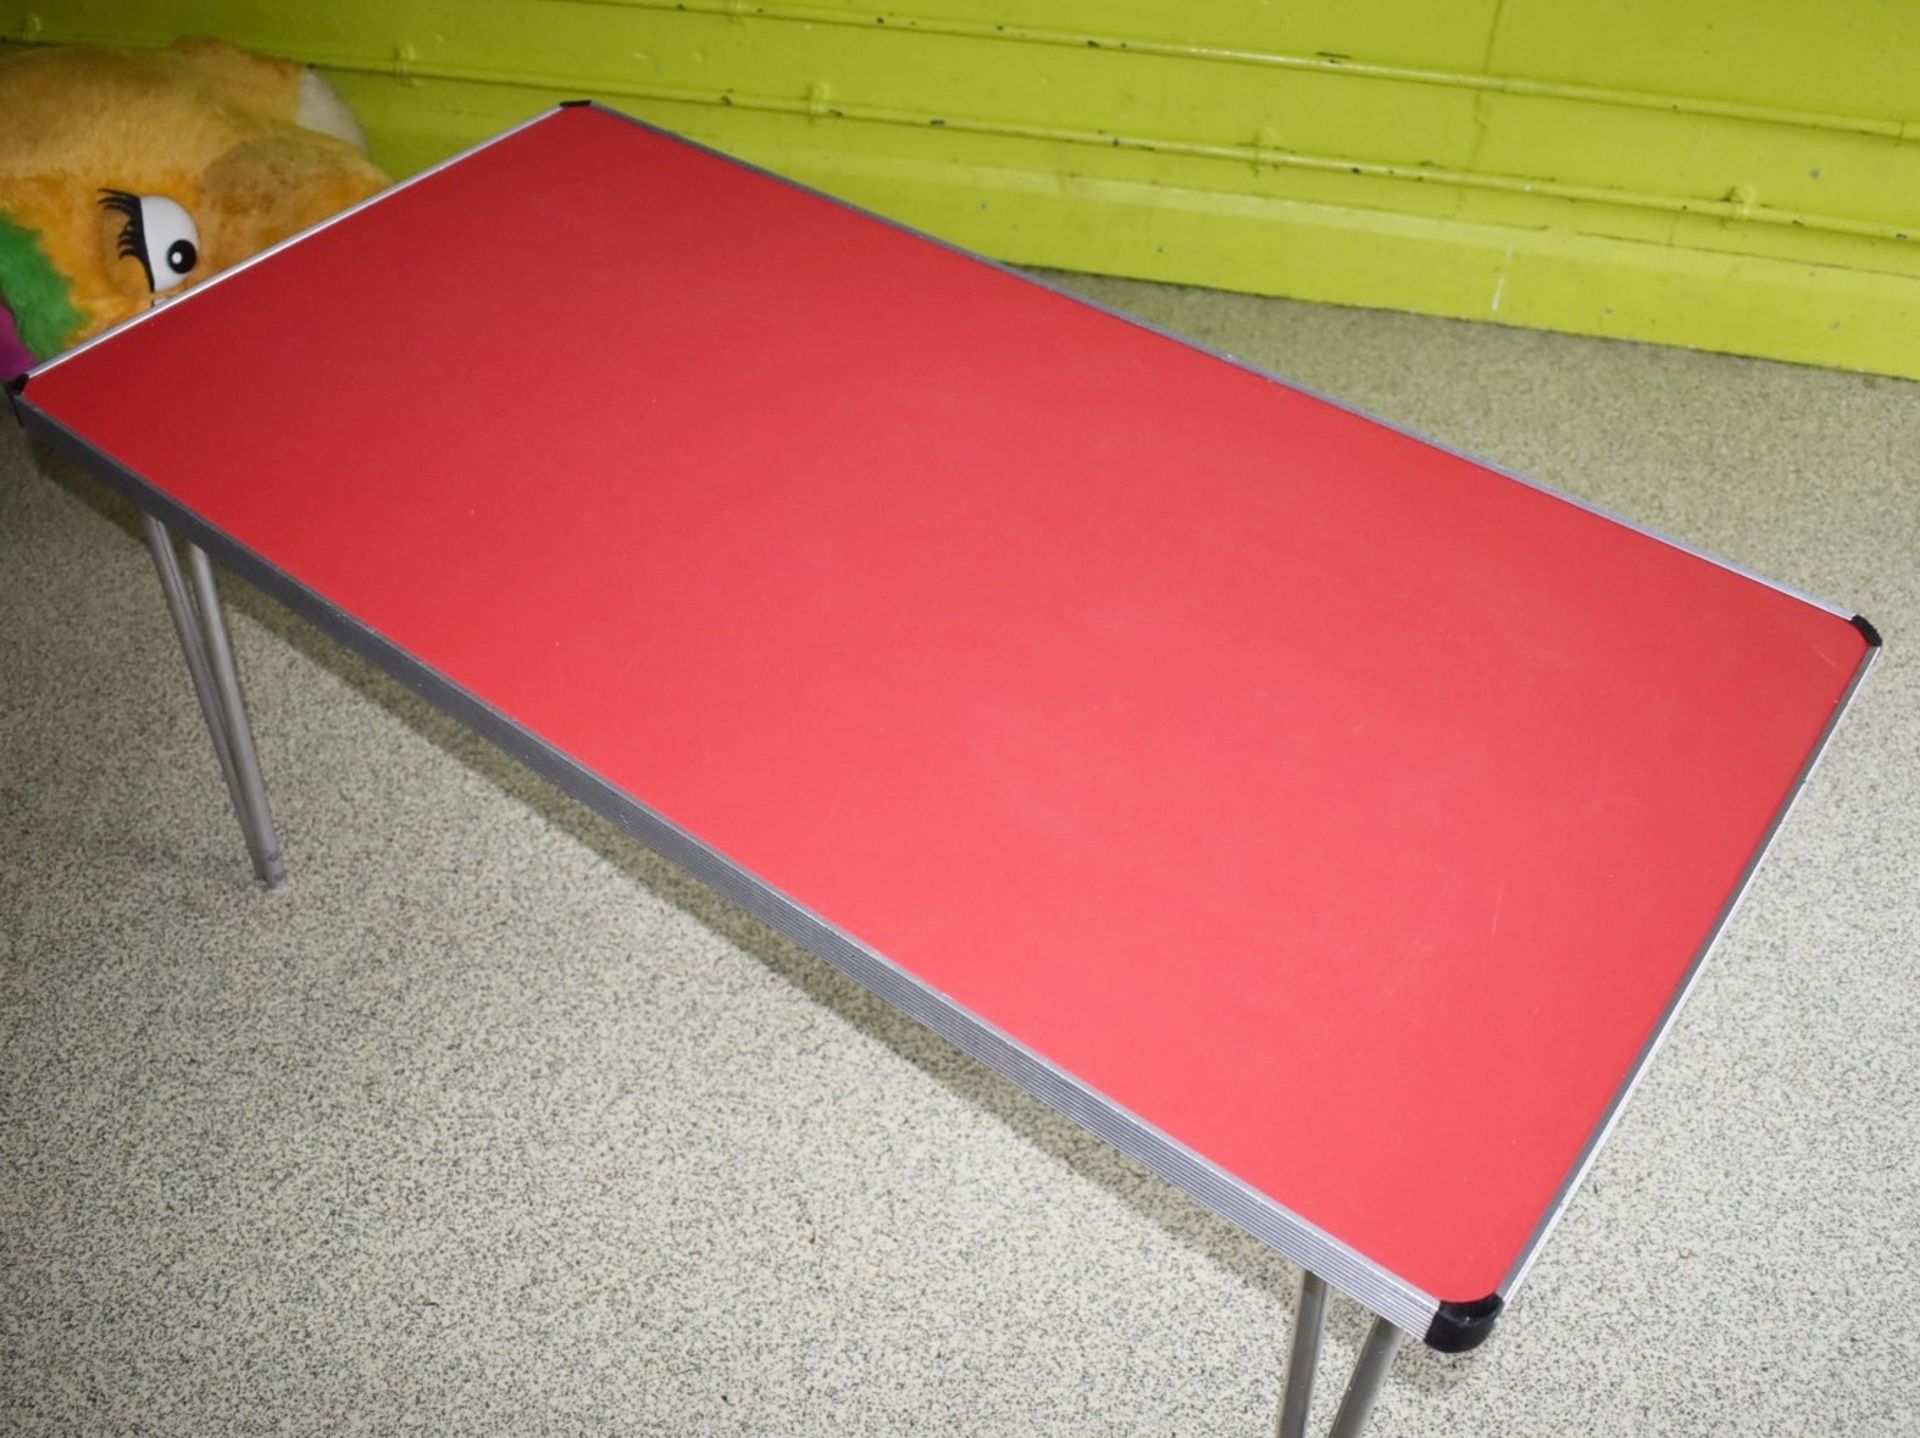 12 x Folding Stacking Tables With Coloured Tops and Chrome Edges - H59 x W120 x D60 cms - Ref - Image 3 of 4